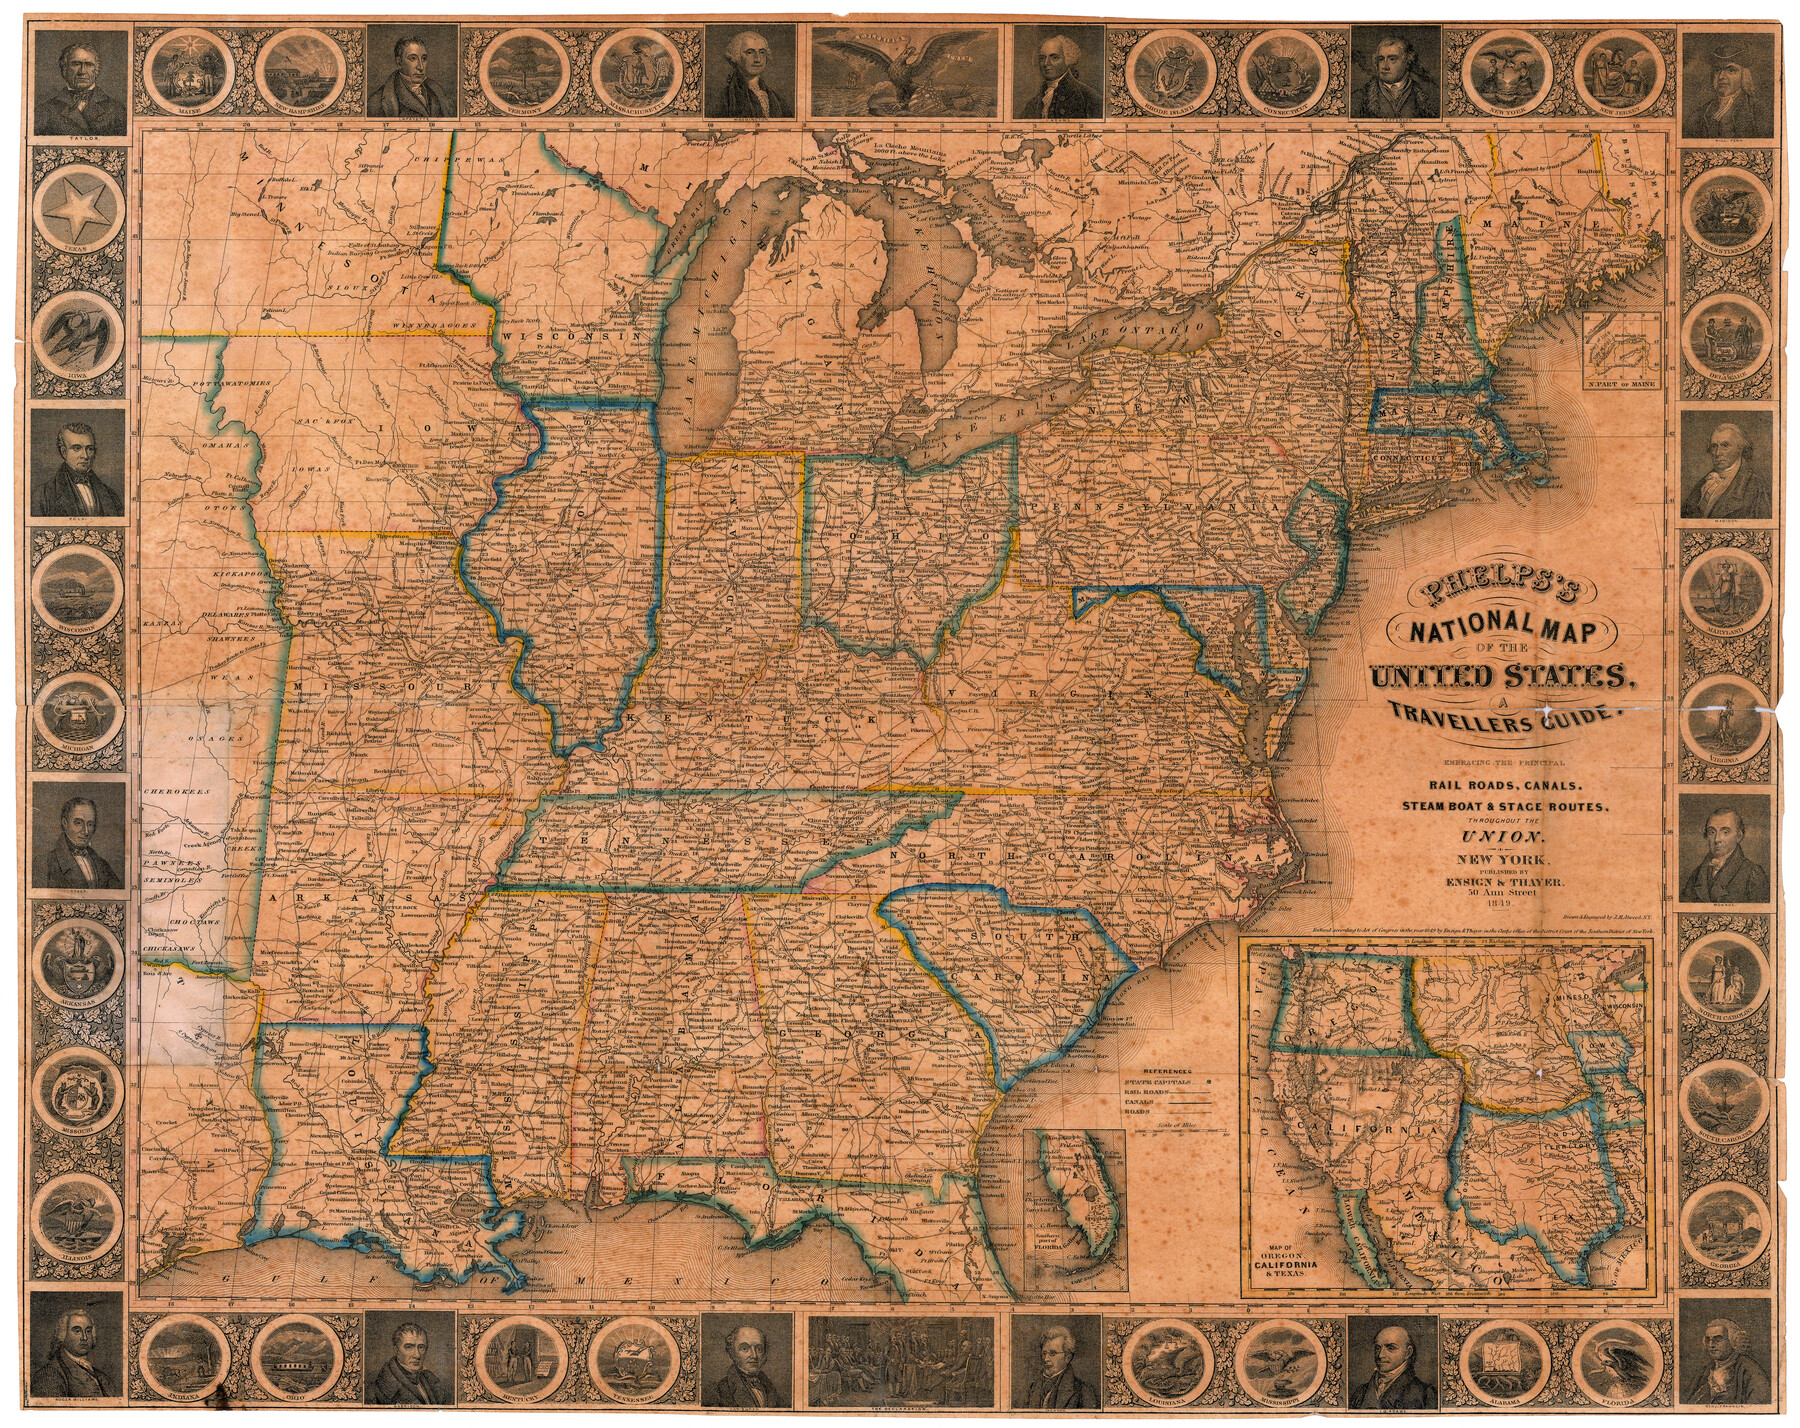 95901, Phelps's National Map of the United States, a Travellers Guide. Embracing the principal railroads, canals, steamboat & stage routes, throughout the Union, Cobb Digital Map Collection